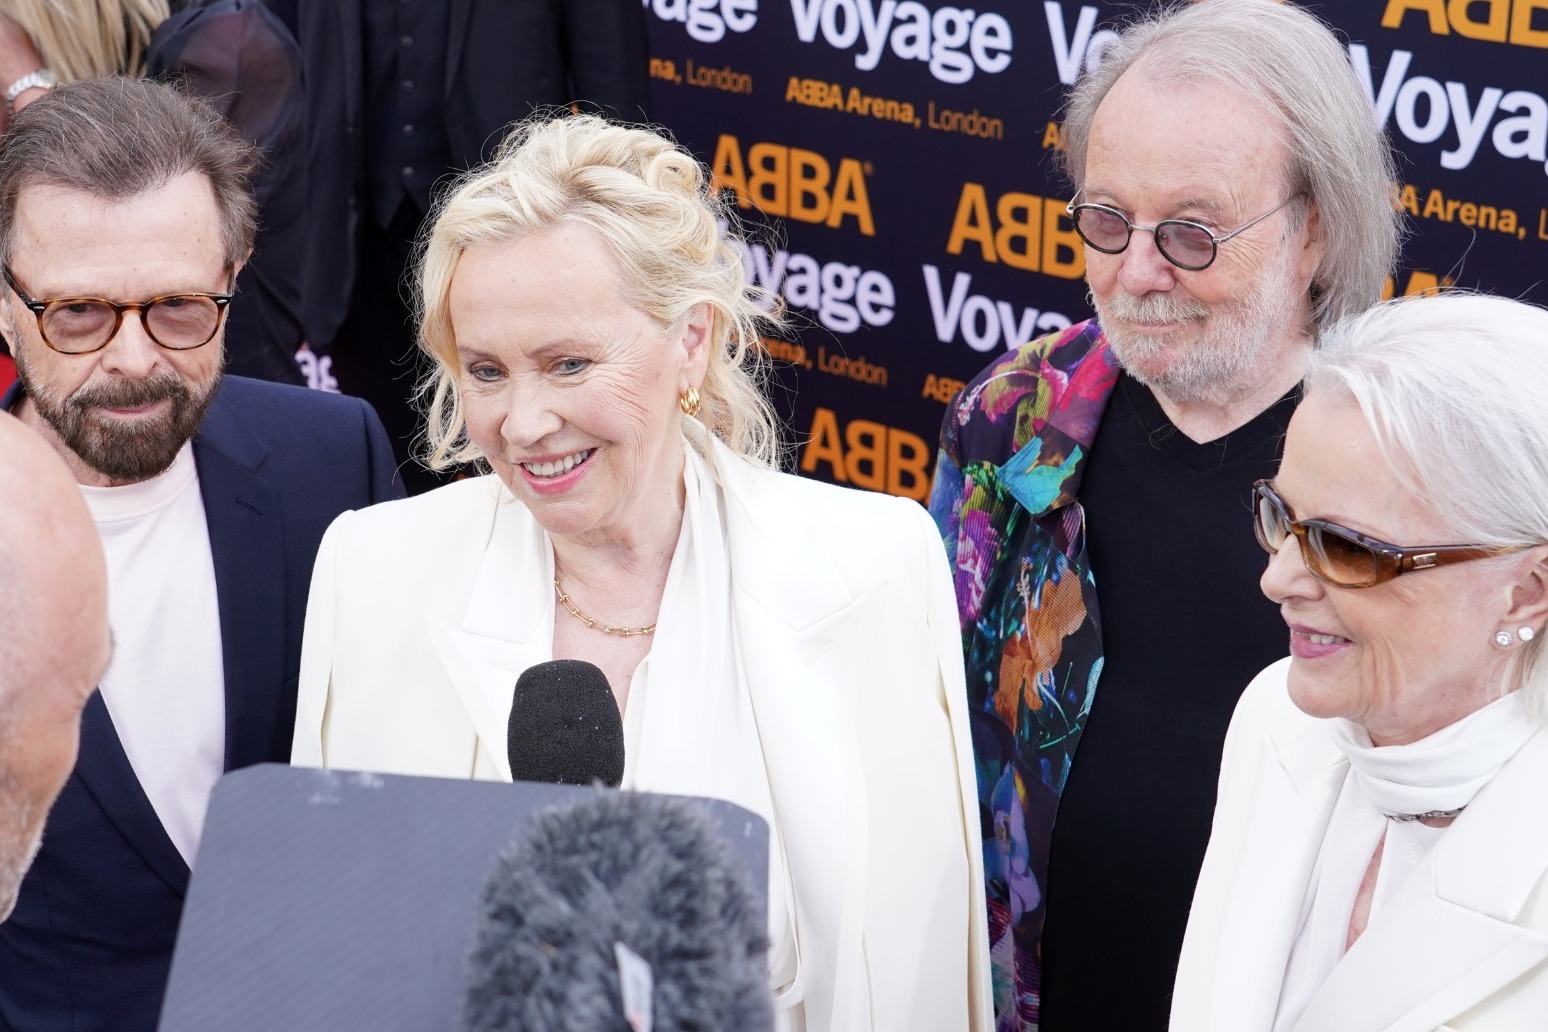 Abba reunite in London for first time since 1982 for Voyage concert 